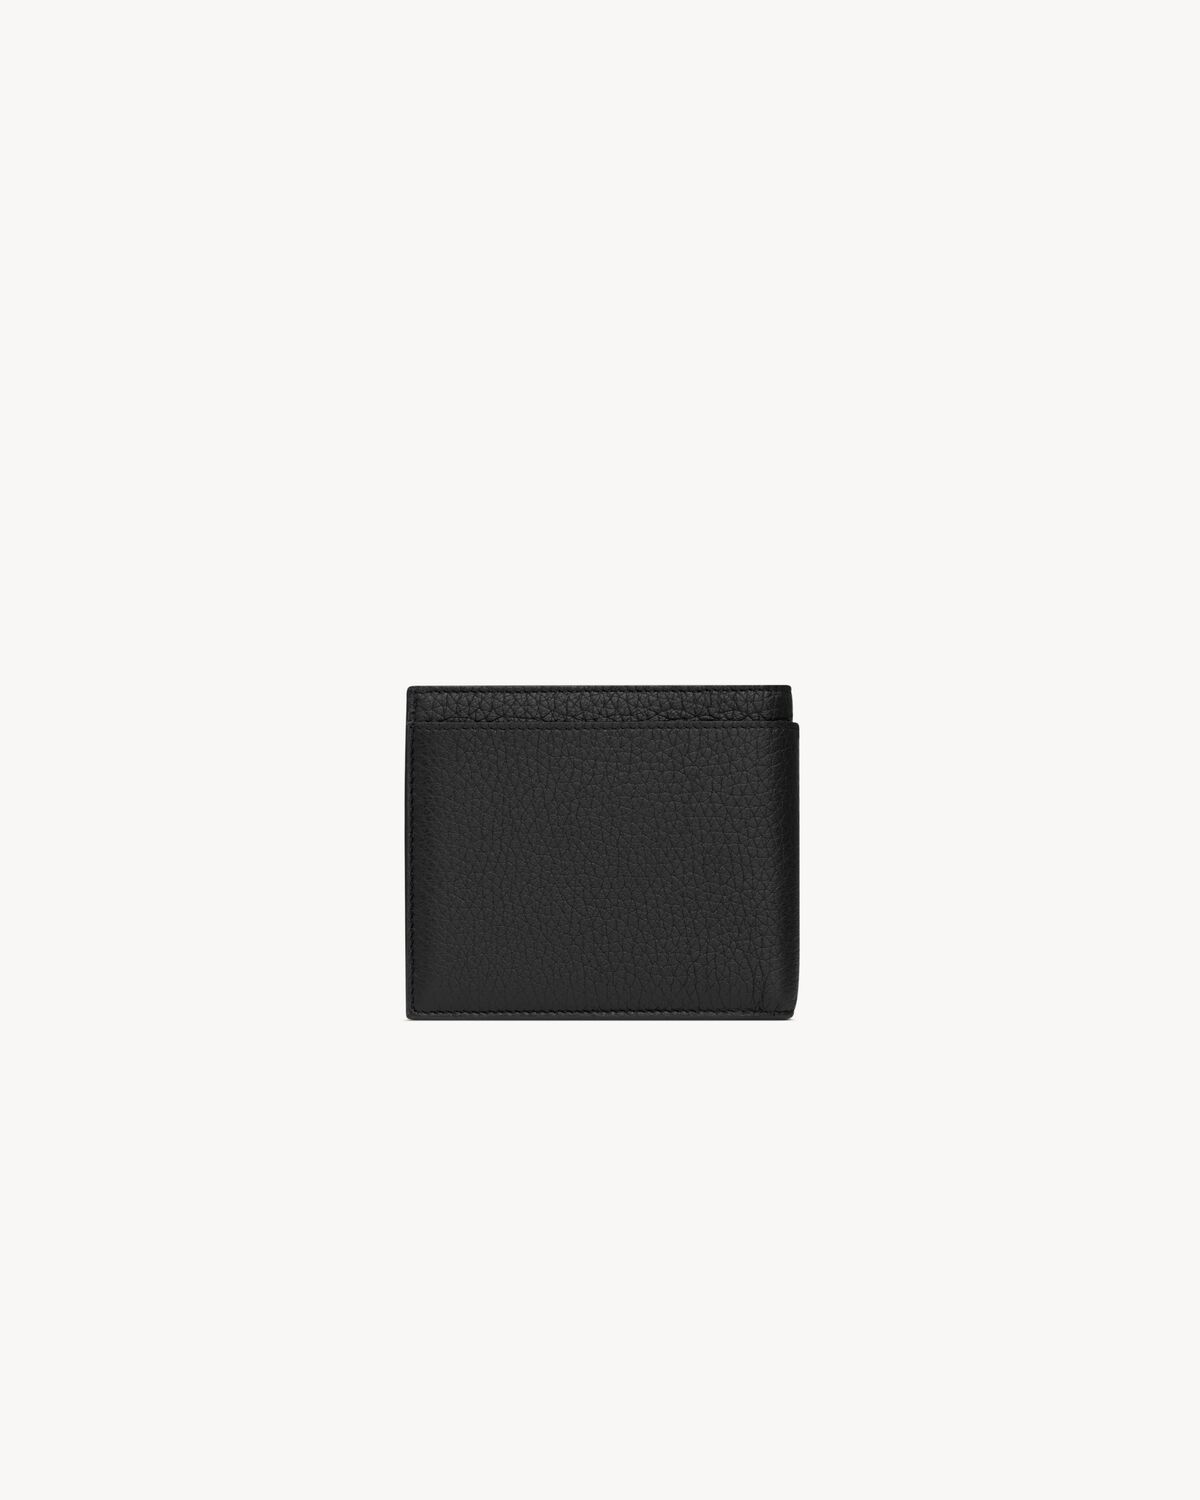 Saint Laurent Paris EAST/WEST wallet with coin purse in grained leather